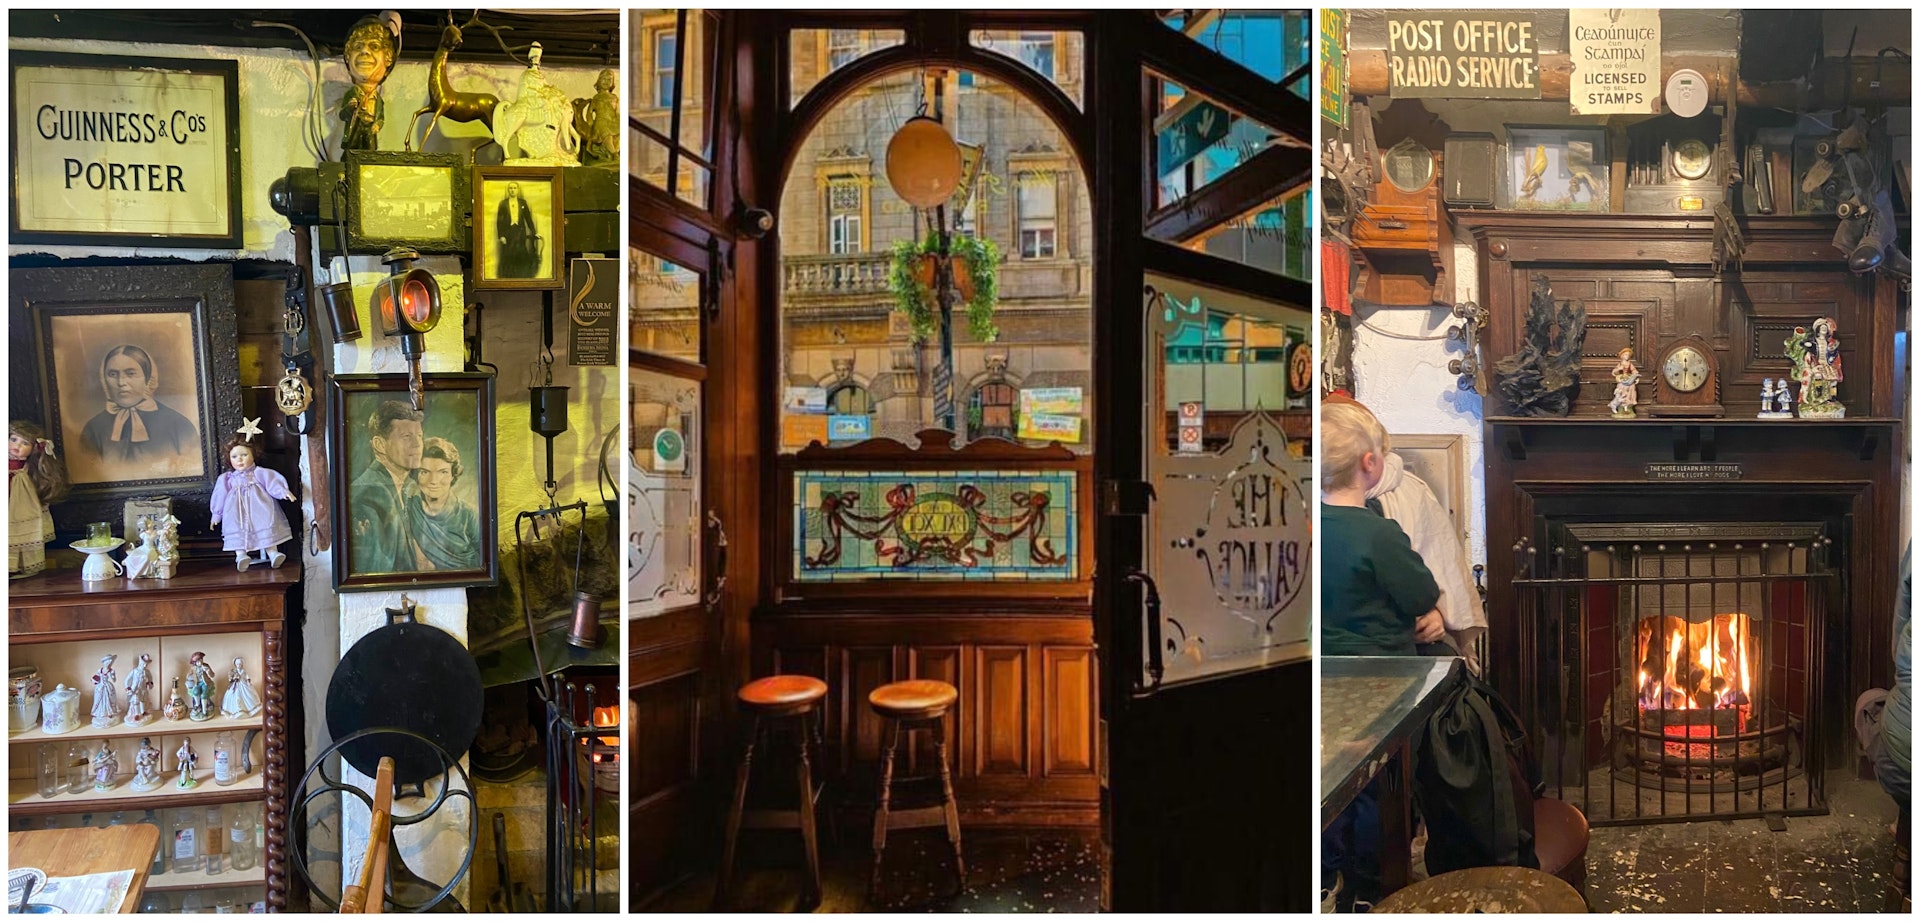 A collage of images featuring traditional interiors from classic Irish pubs